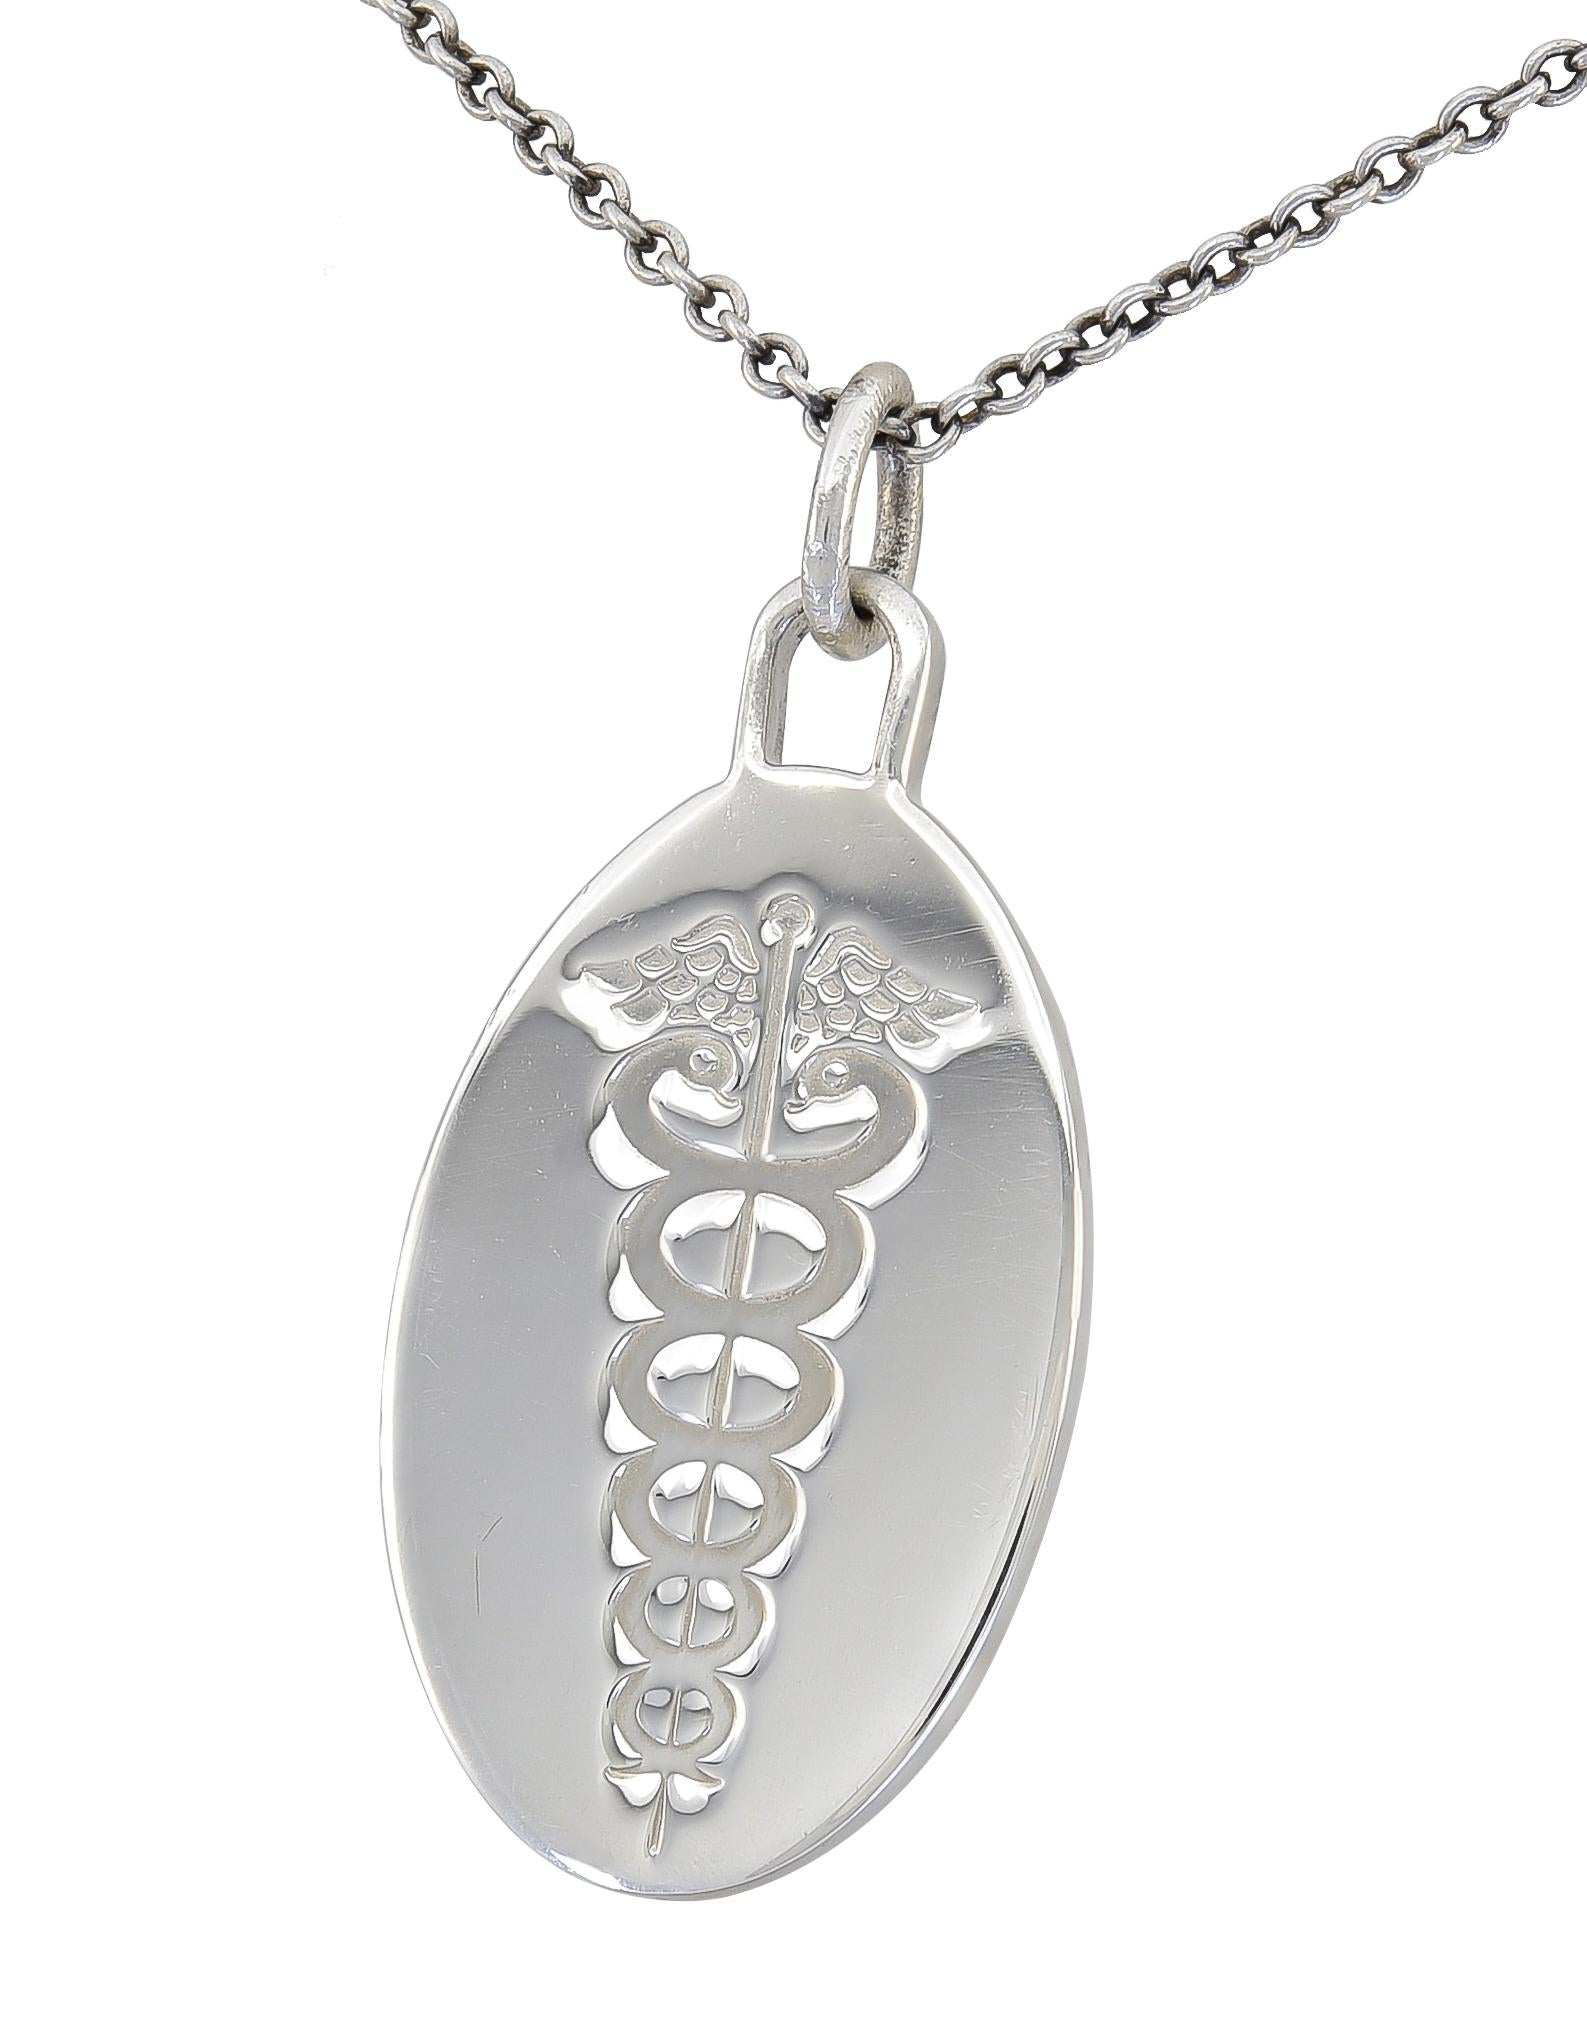 Oval sterling silver pendant/charm with large engraved caduceus.  Made and signed by TIFFANY & Co.  2/3